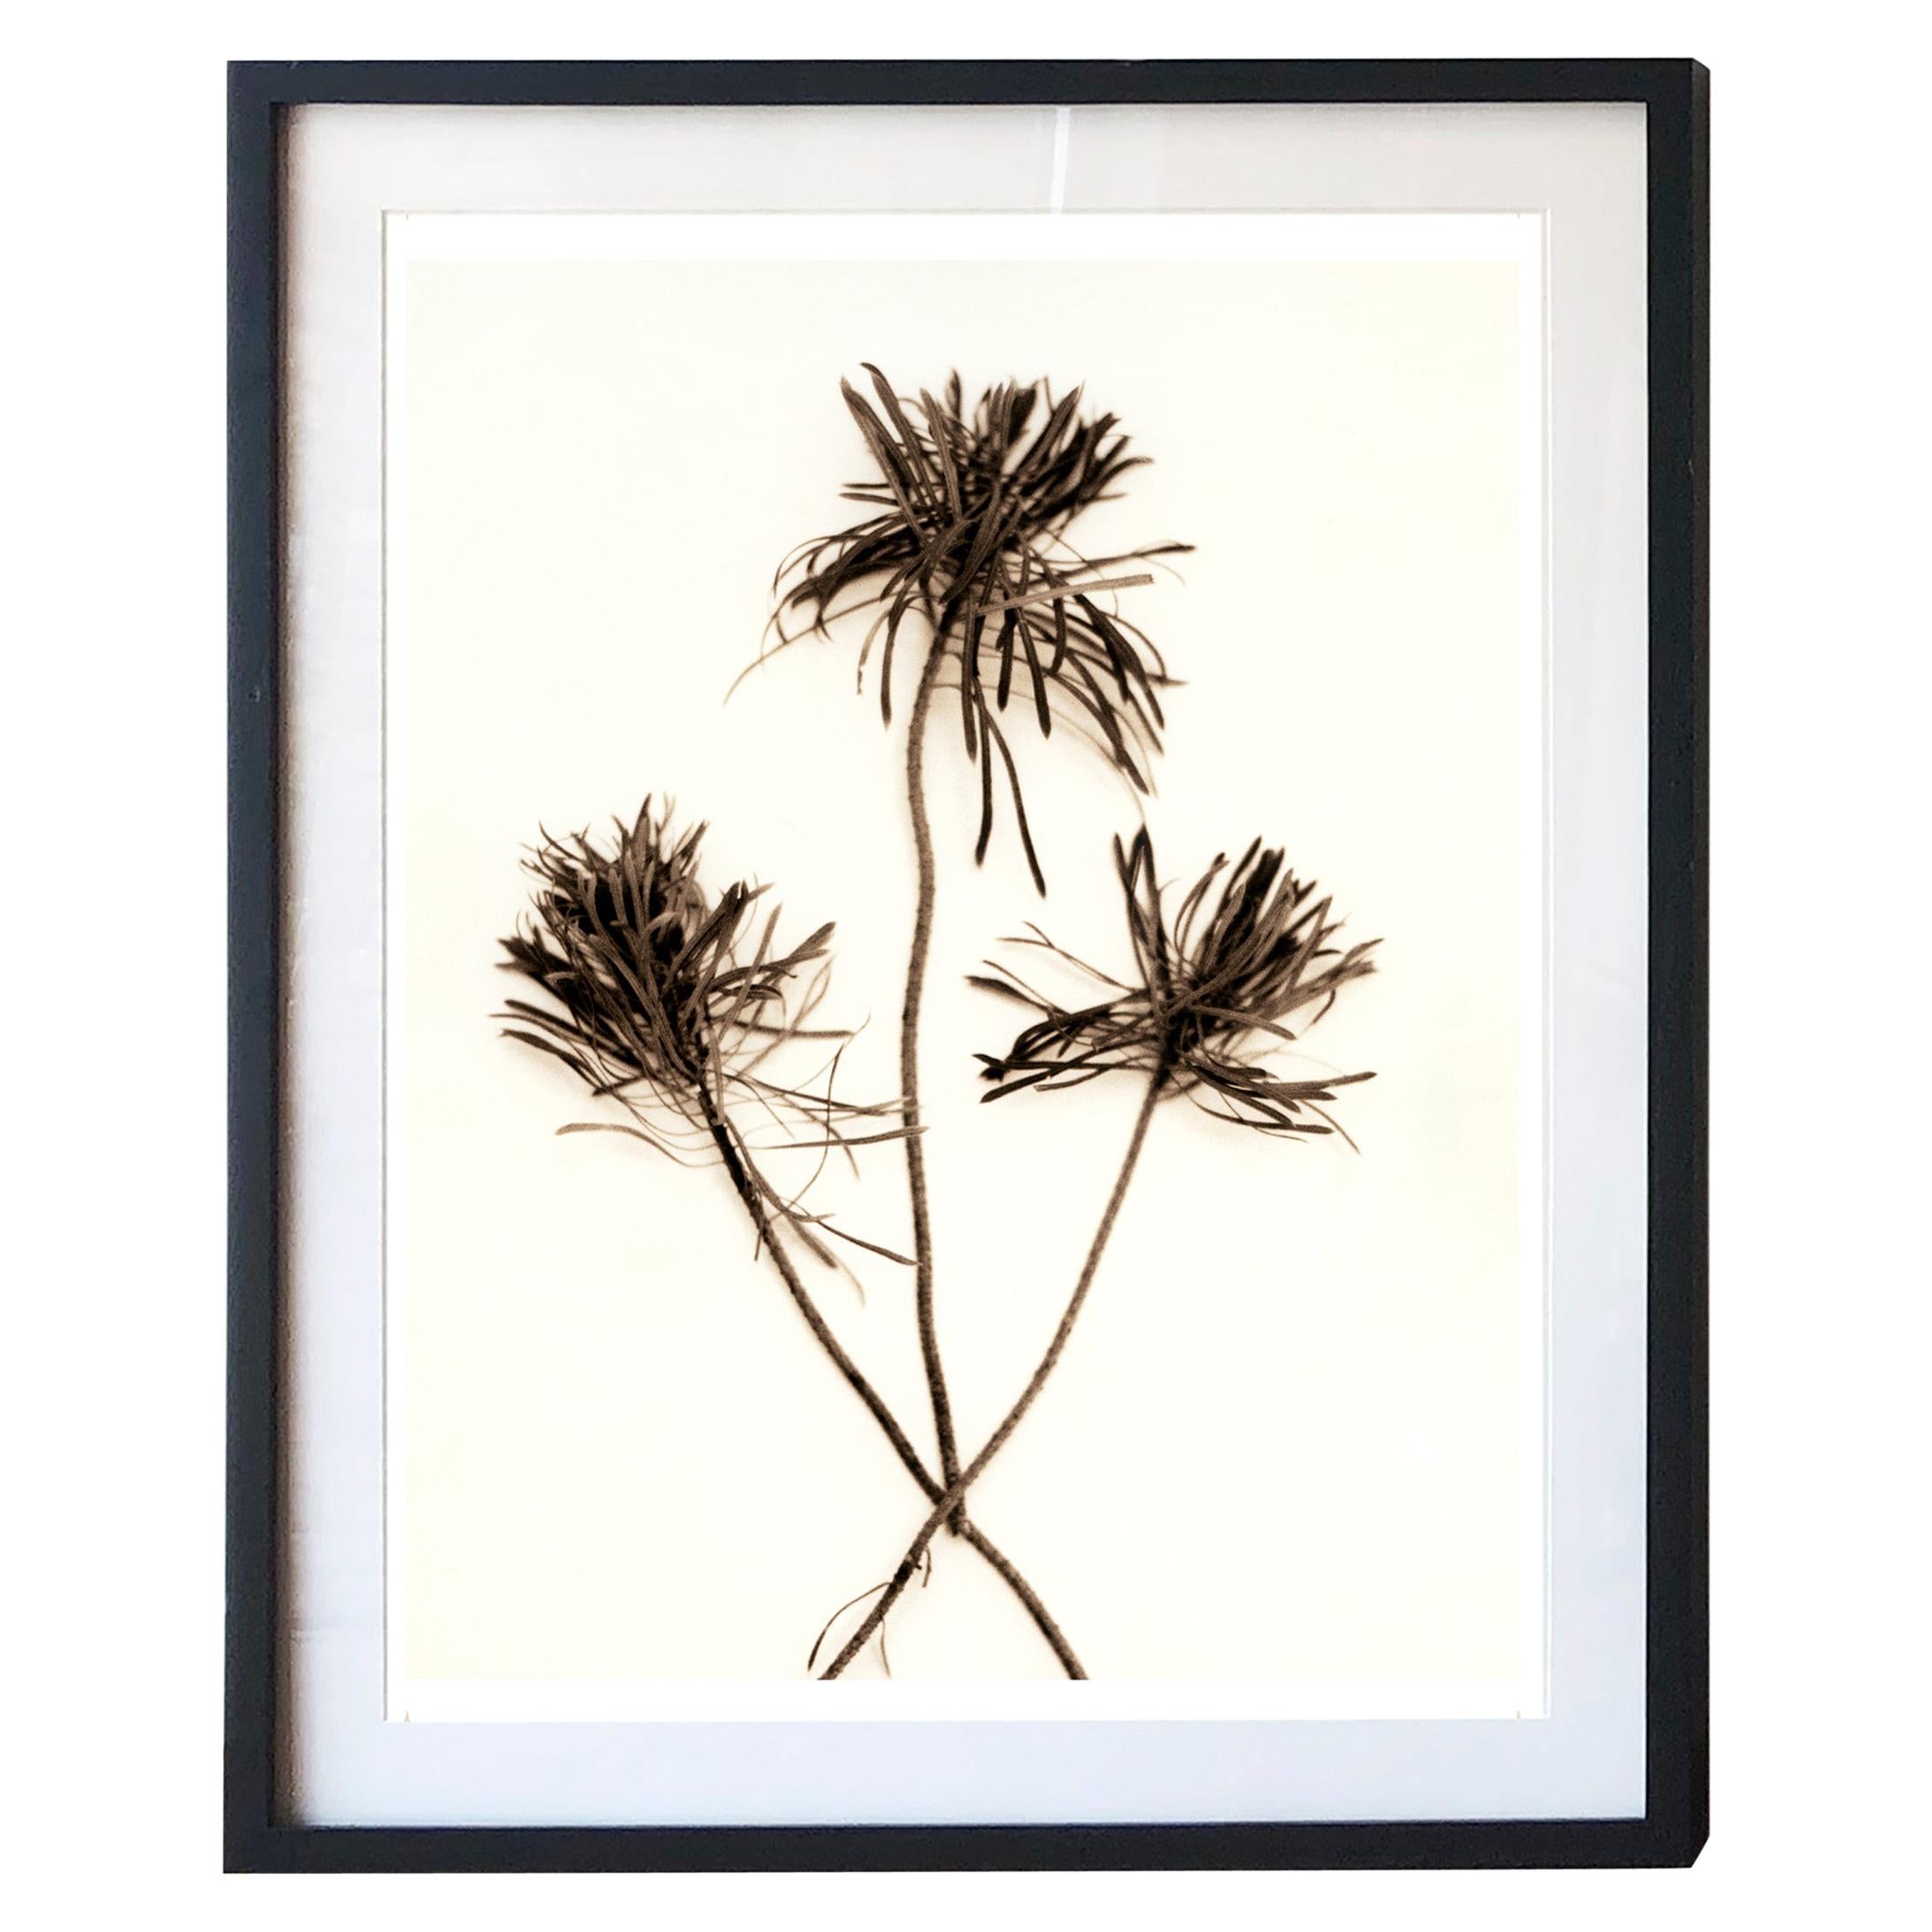 Digital Prints Based on Hand-Toned Silver Gelatin Prints, Branch Series For Sale